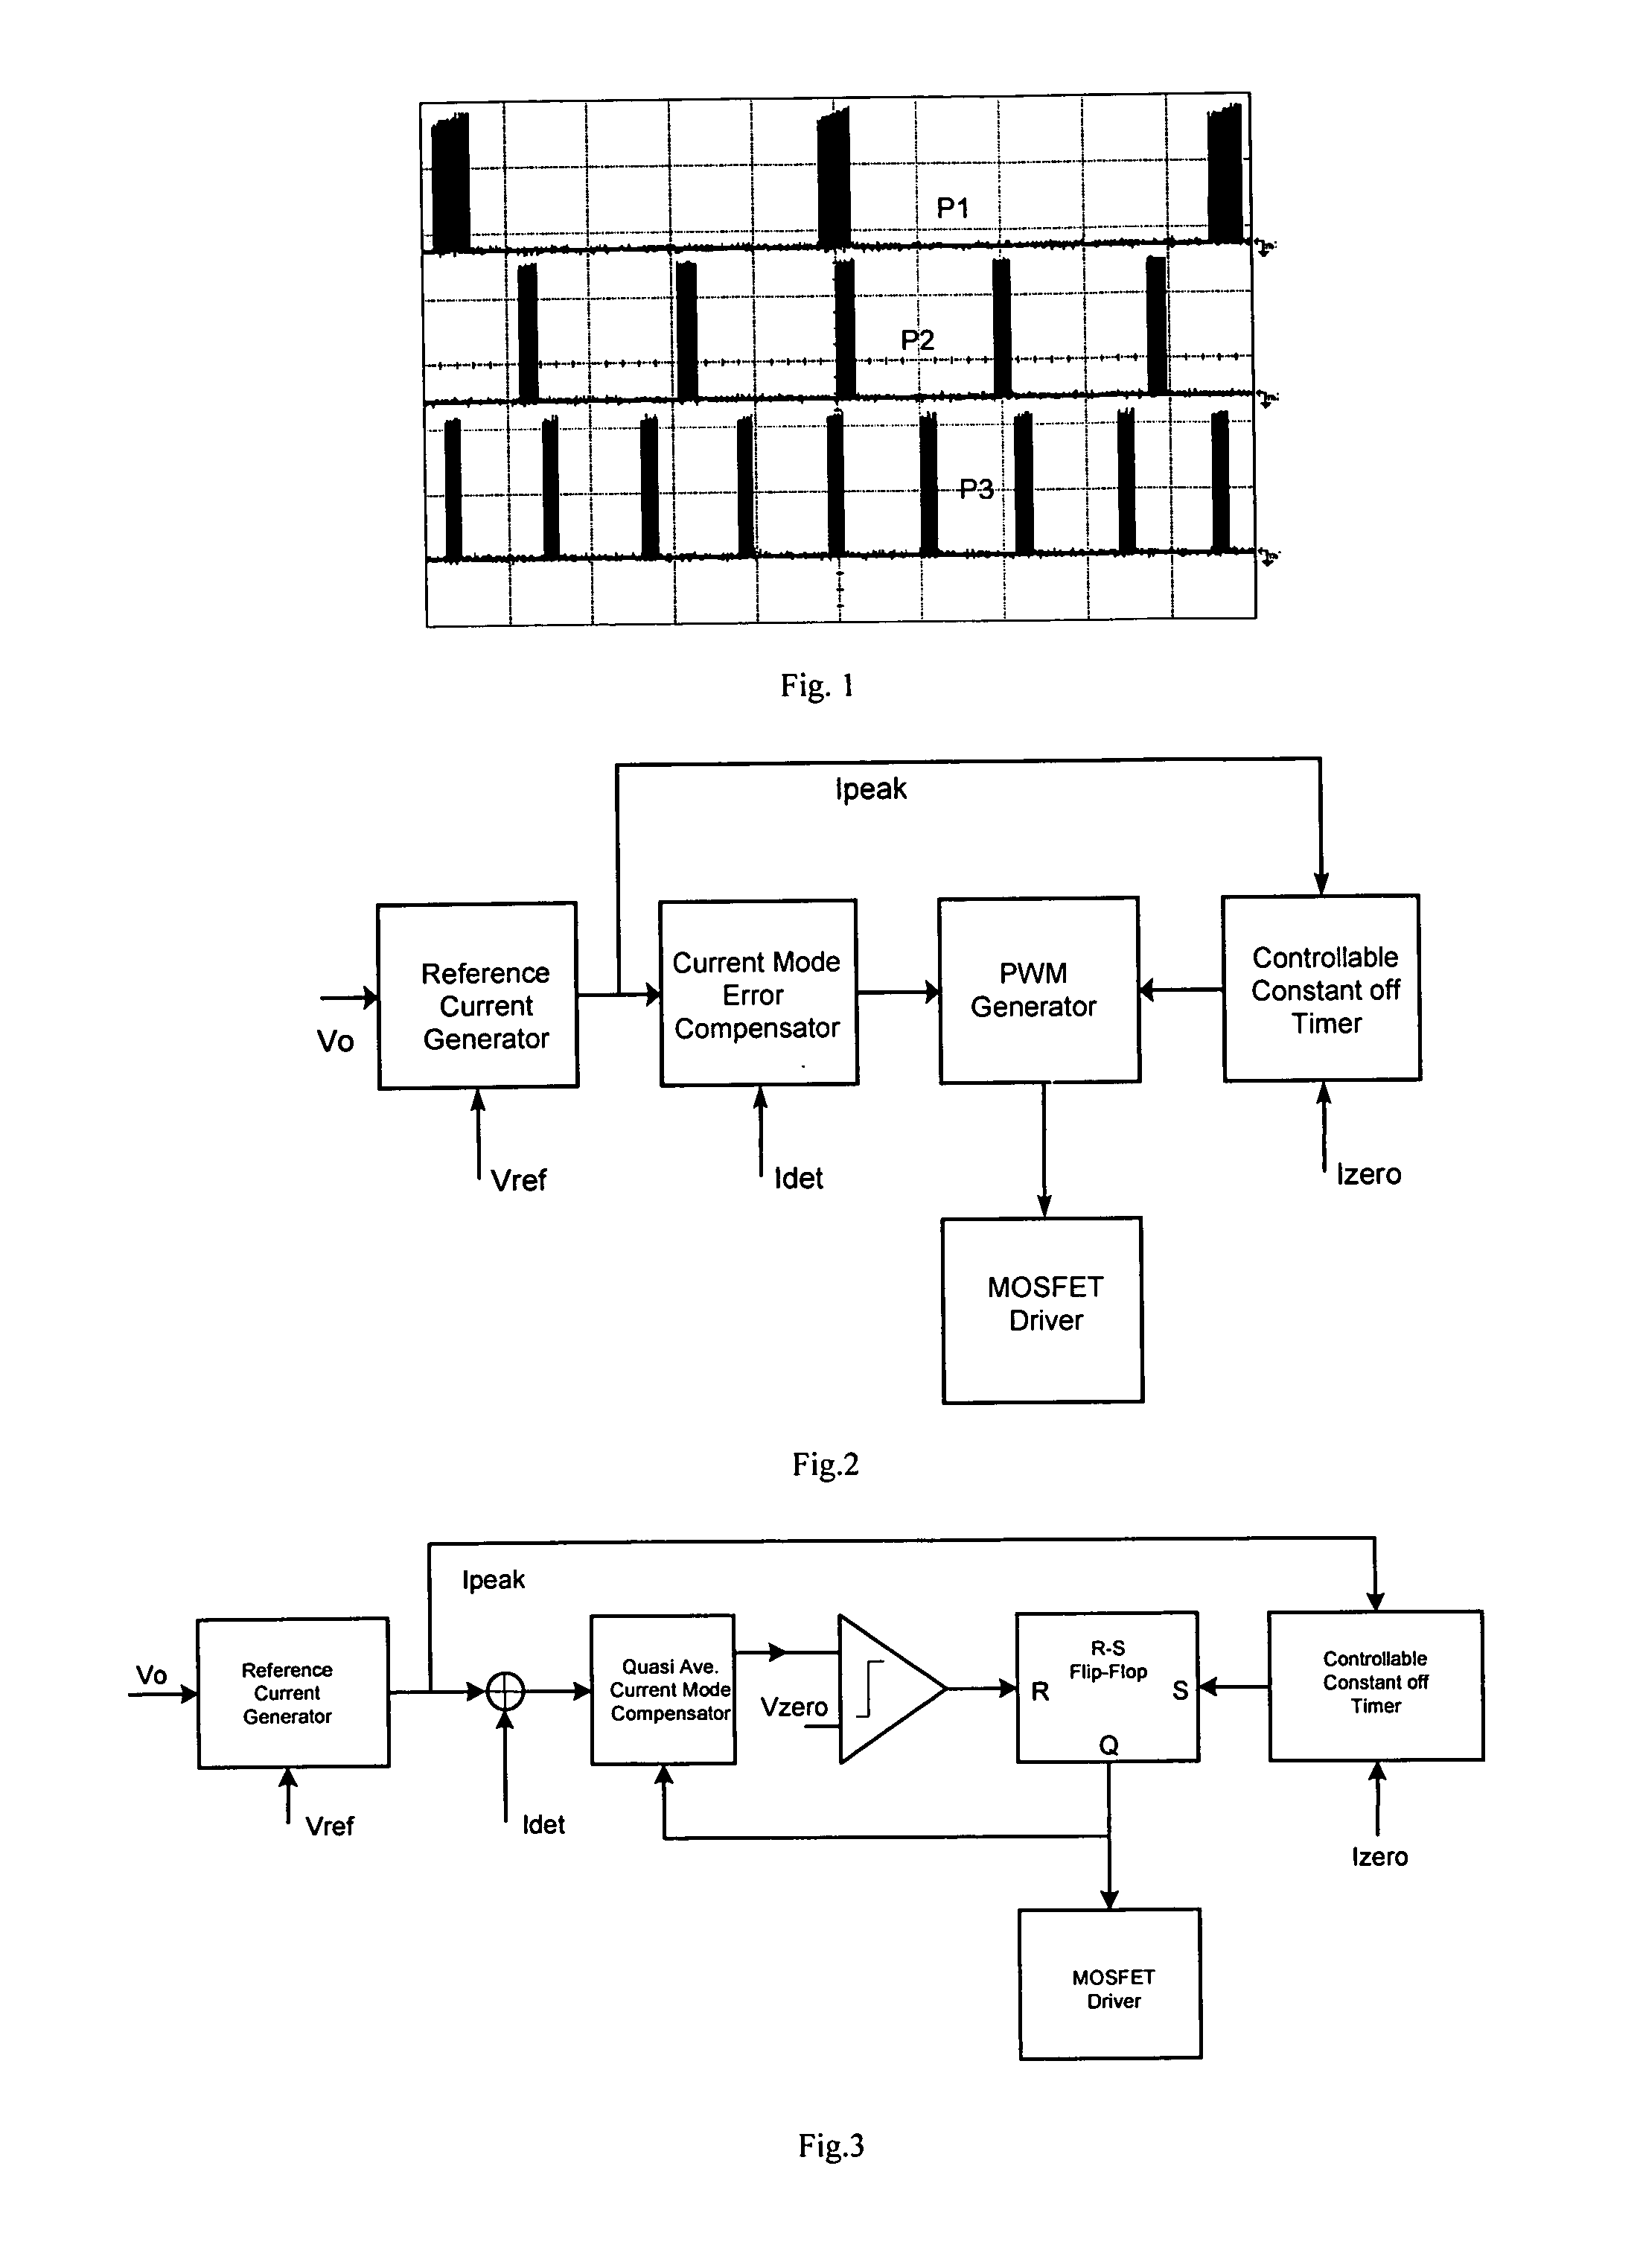 Switching adapter control method for adaptive mobile power systems